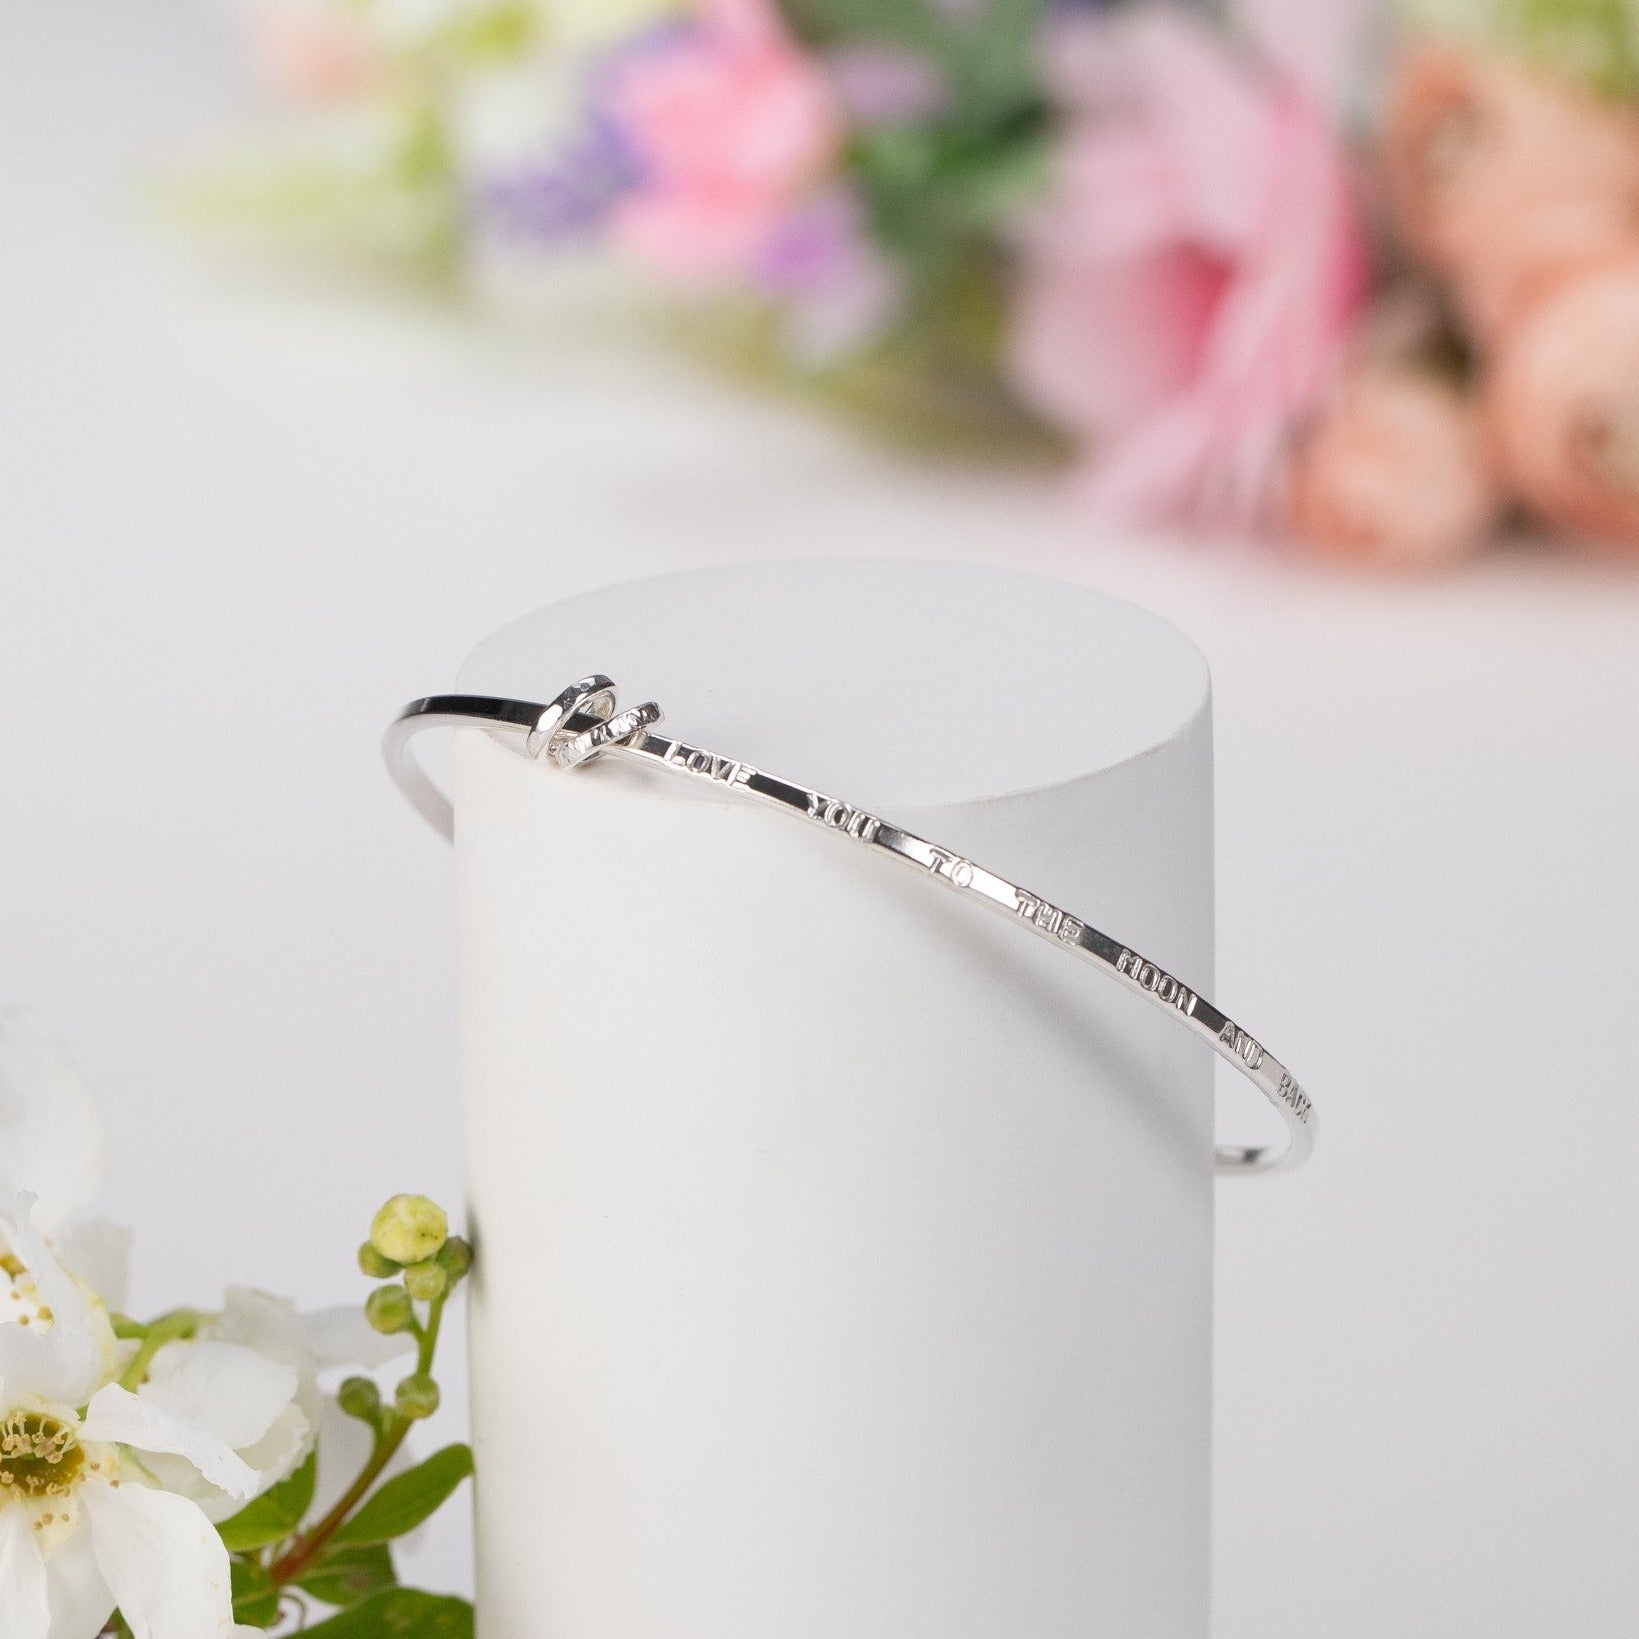 Personalised Family Links Bangle - 2 Links for 2 Loved Ones - Silver